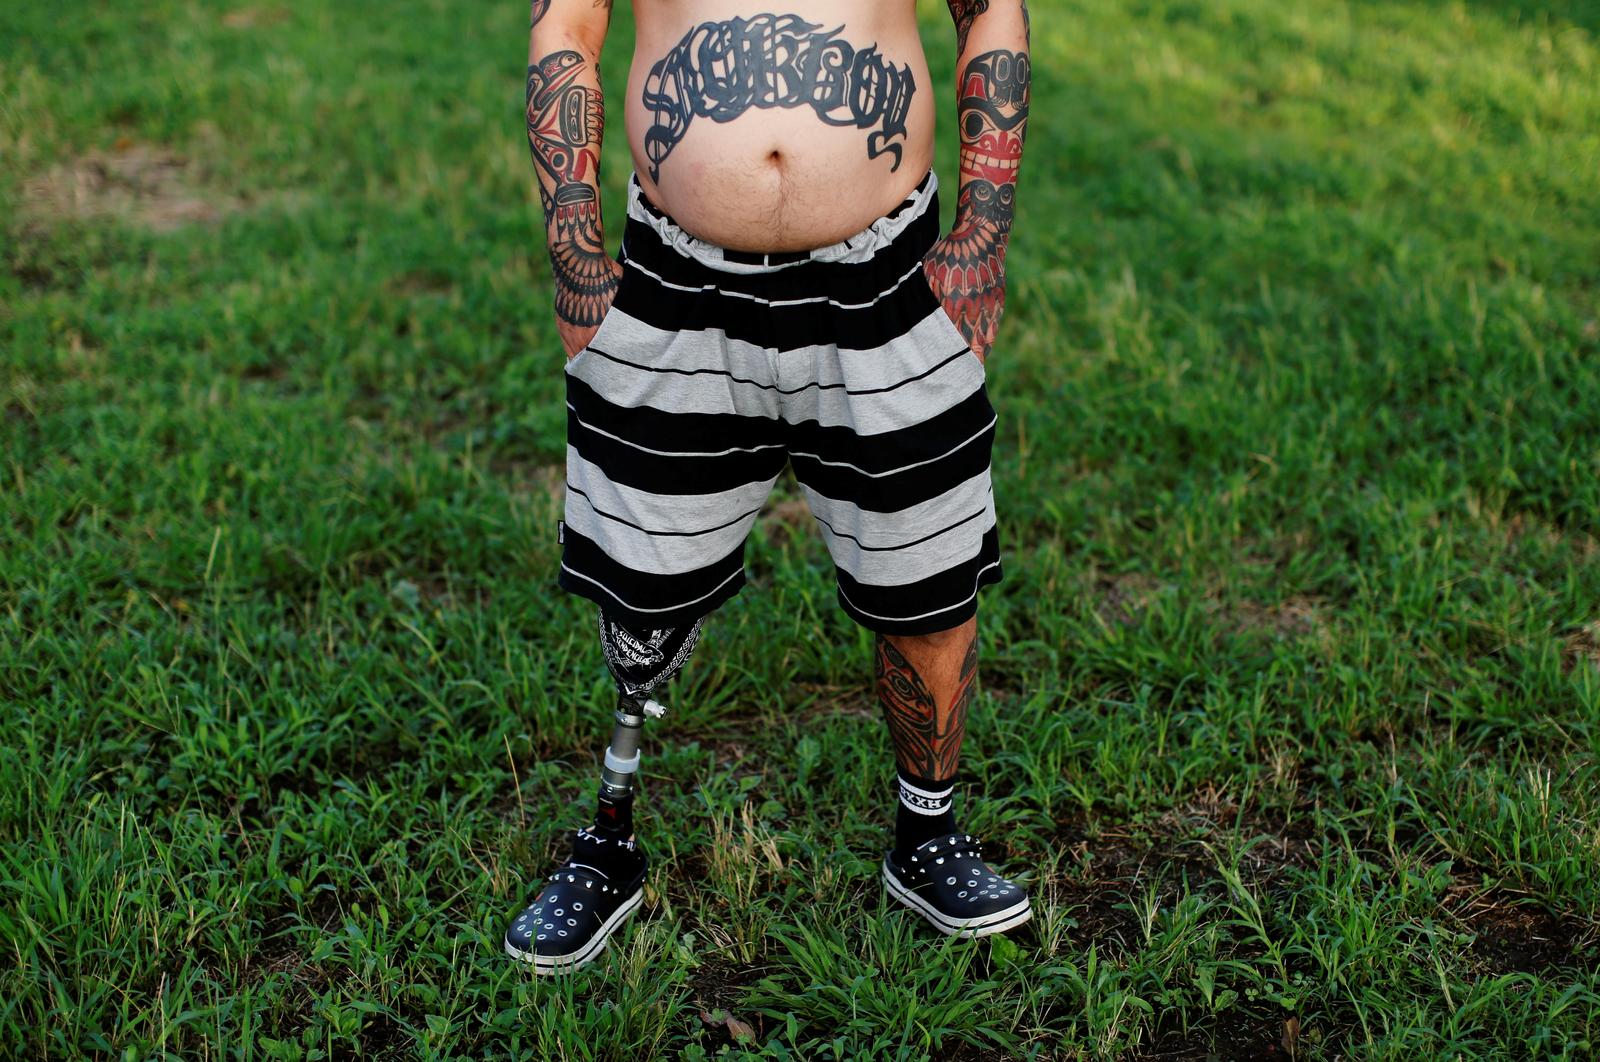 Office worker Hideyuki Togashi, 48, shows his tattoos as he poses for a photograph at a park near his house in Tokyo, Japan, September 7, 2020. Photo: Reuters